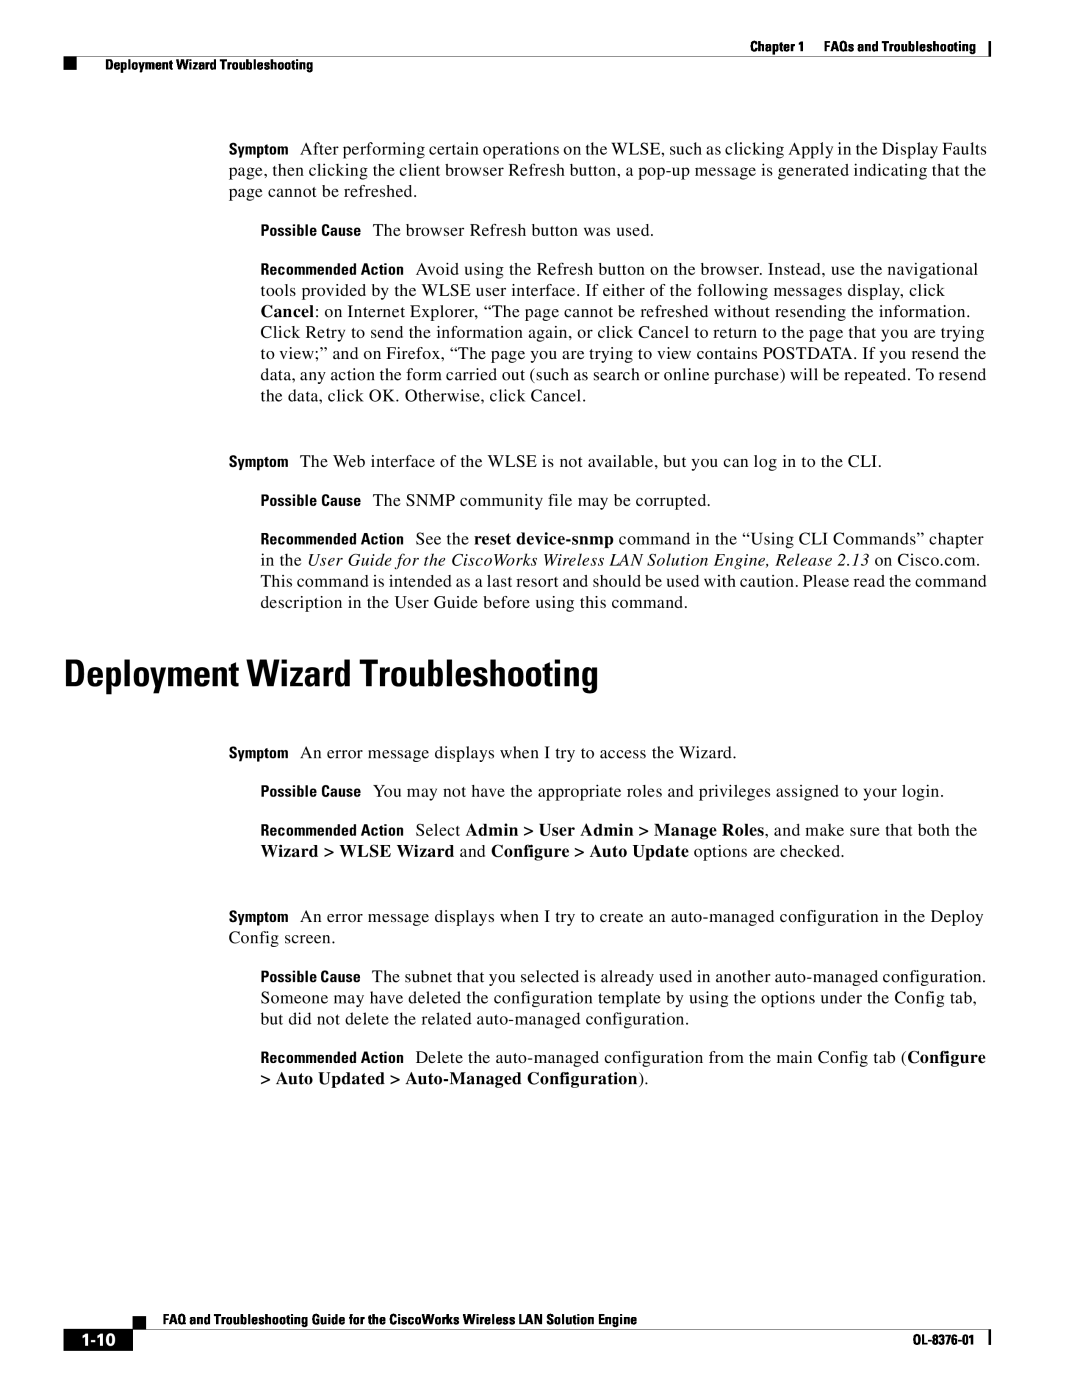 Cisco Systems OL-8376-01 manual Deployment Wizard Troubleshooting, 1-10, FAQs and Troubleshooting 